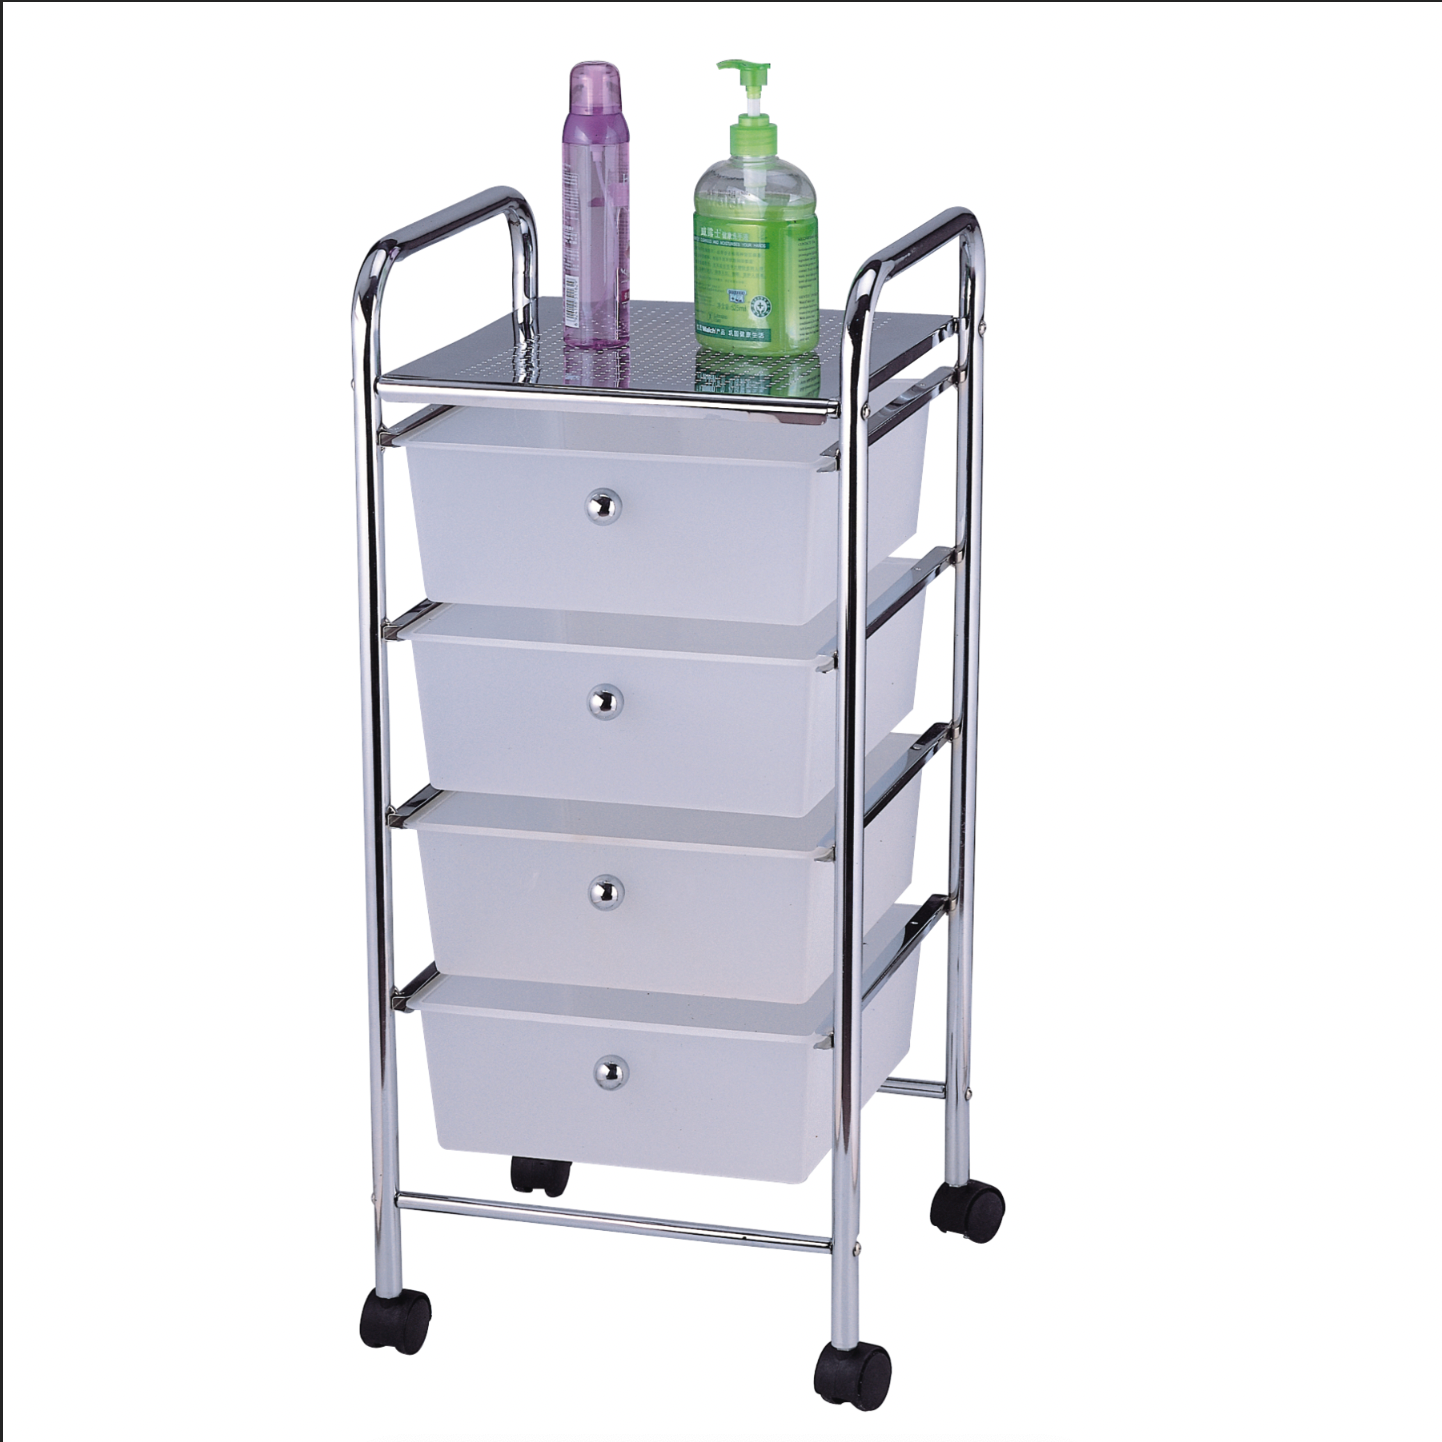 4-Tier Storage Rack with wheels, AN-40-806